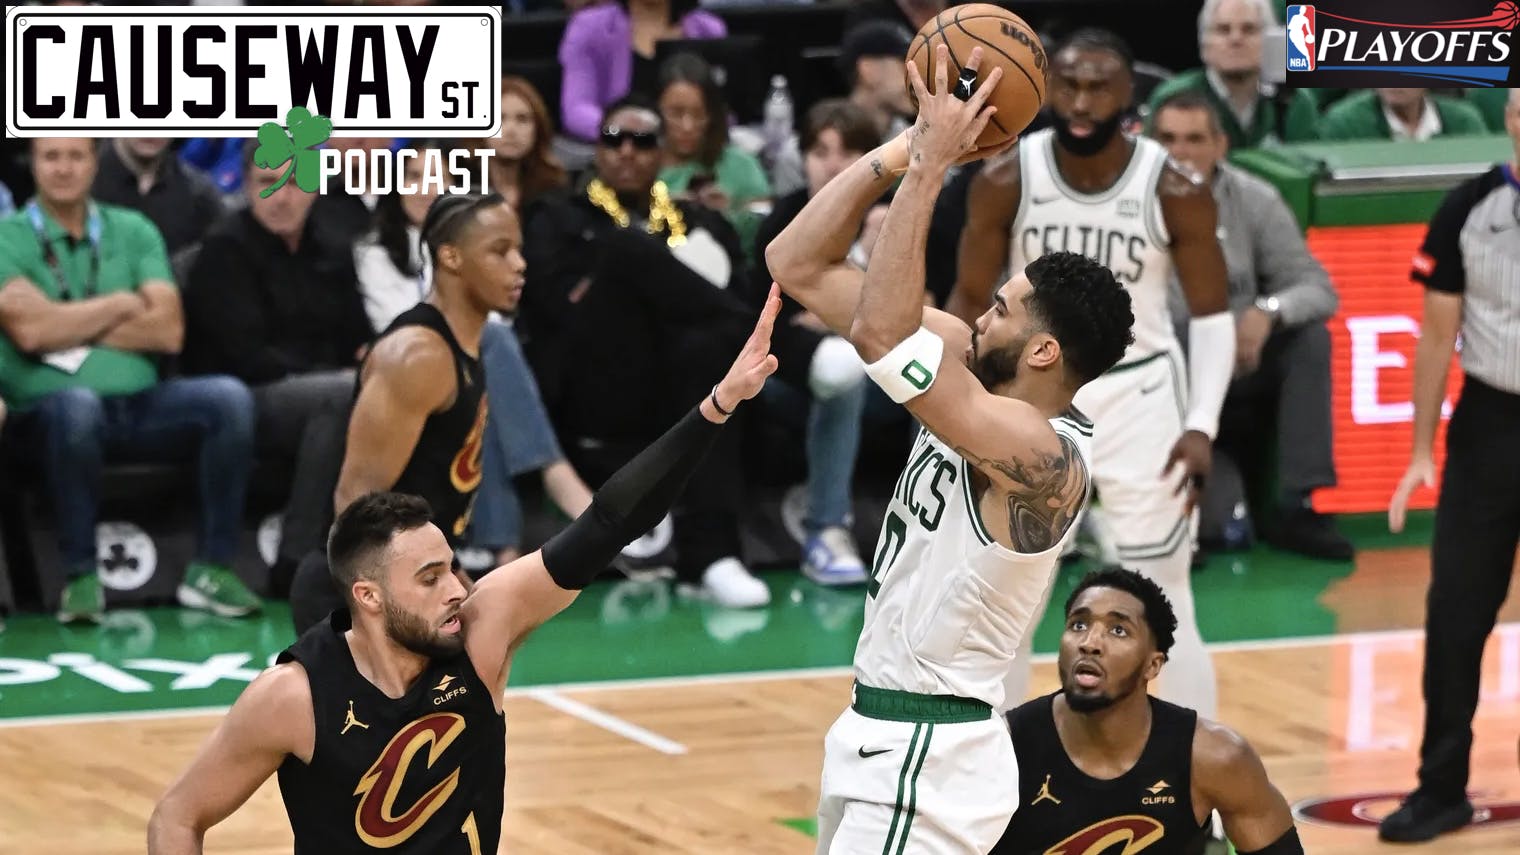 337: Are Jayson Tatum's "offensive woes" a concern?